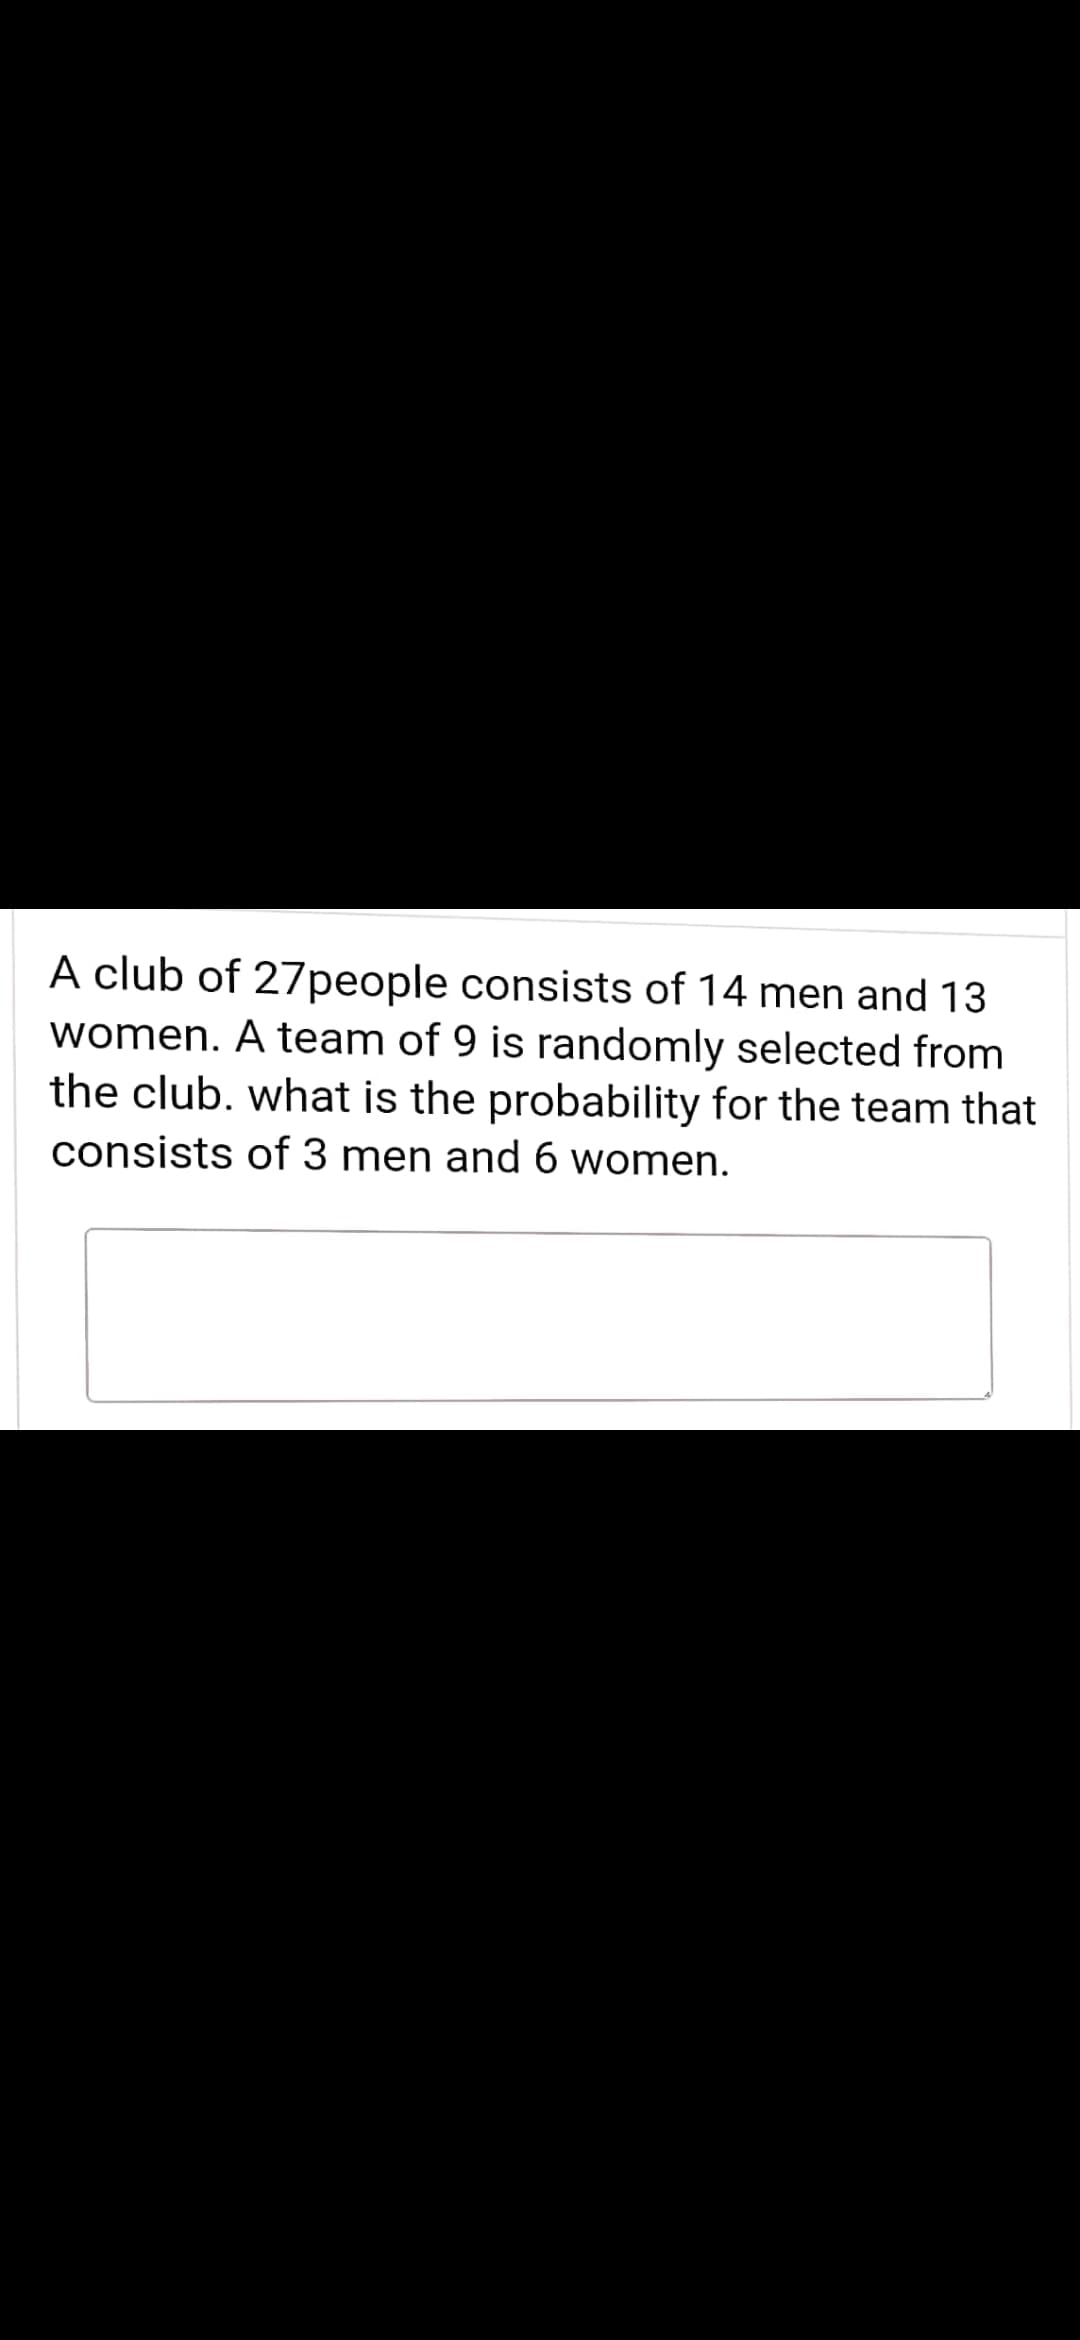 A club of 27people consists of 14 men and 13
women. A team of 9 is randomly selected from
the club. what is the probability for the team that
consists of 3 men and 6 women.
